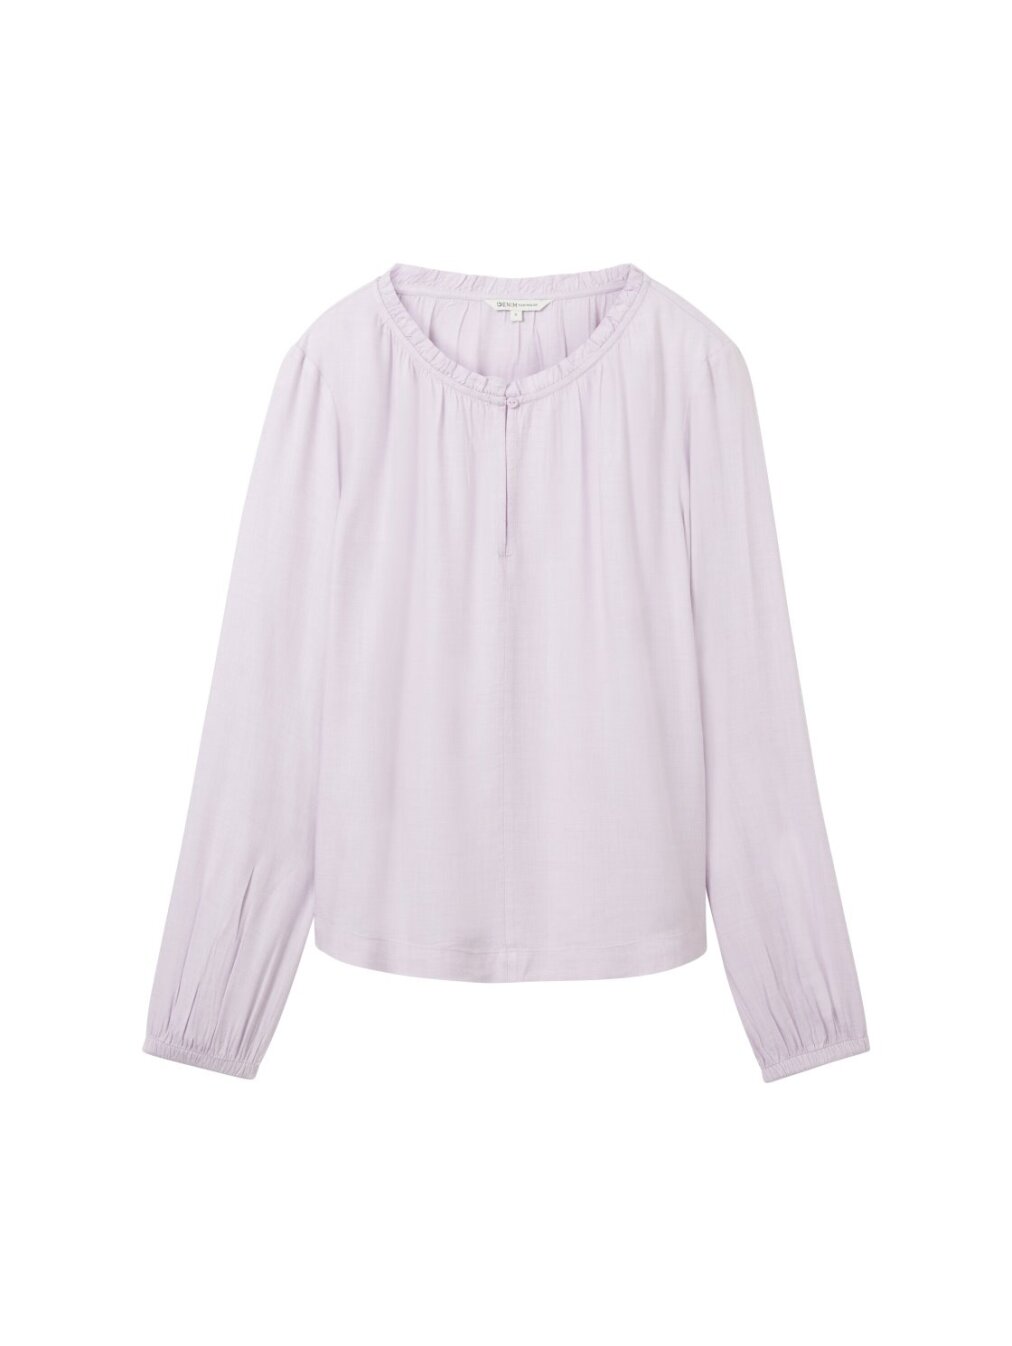 cozy blouse with ruffle neck